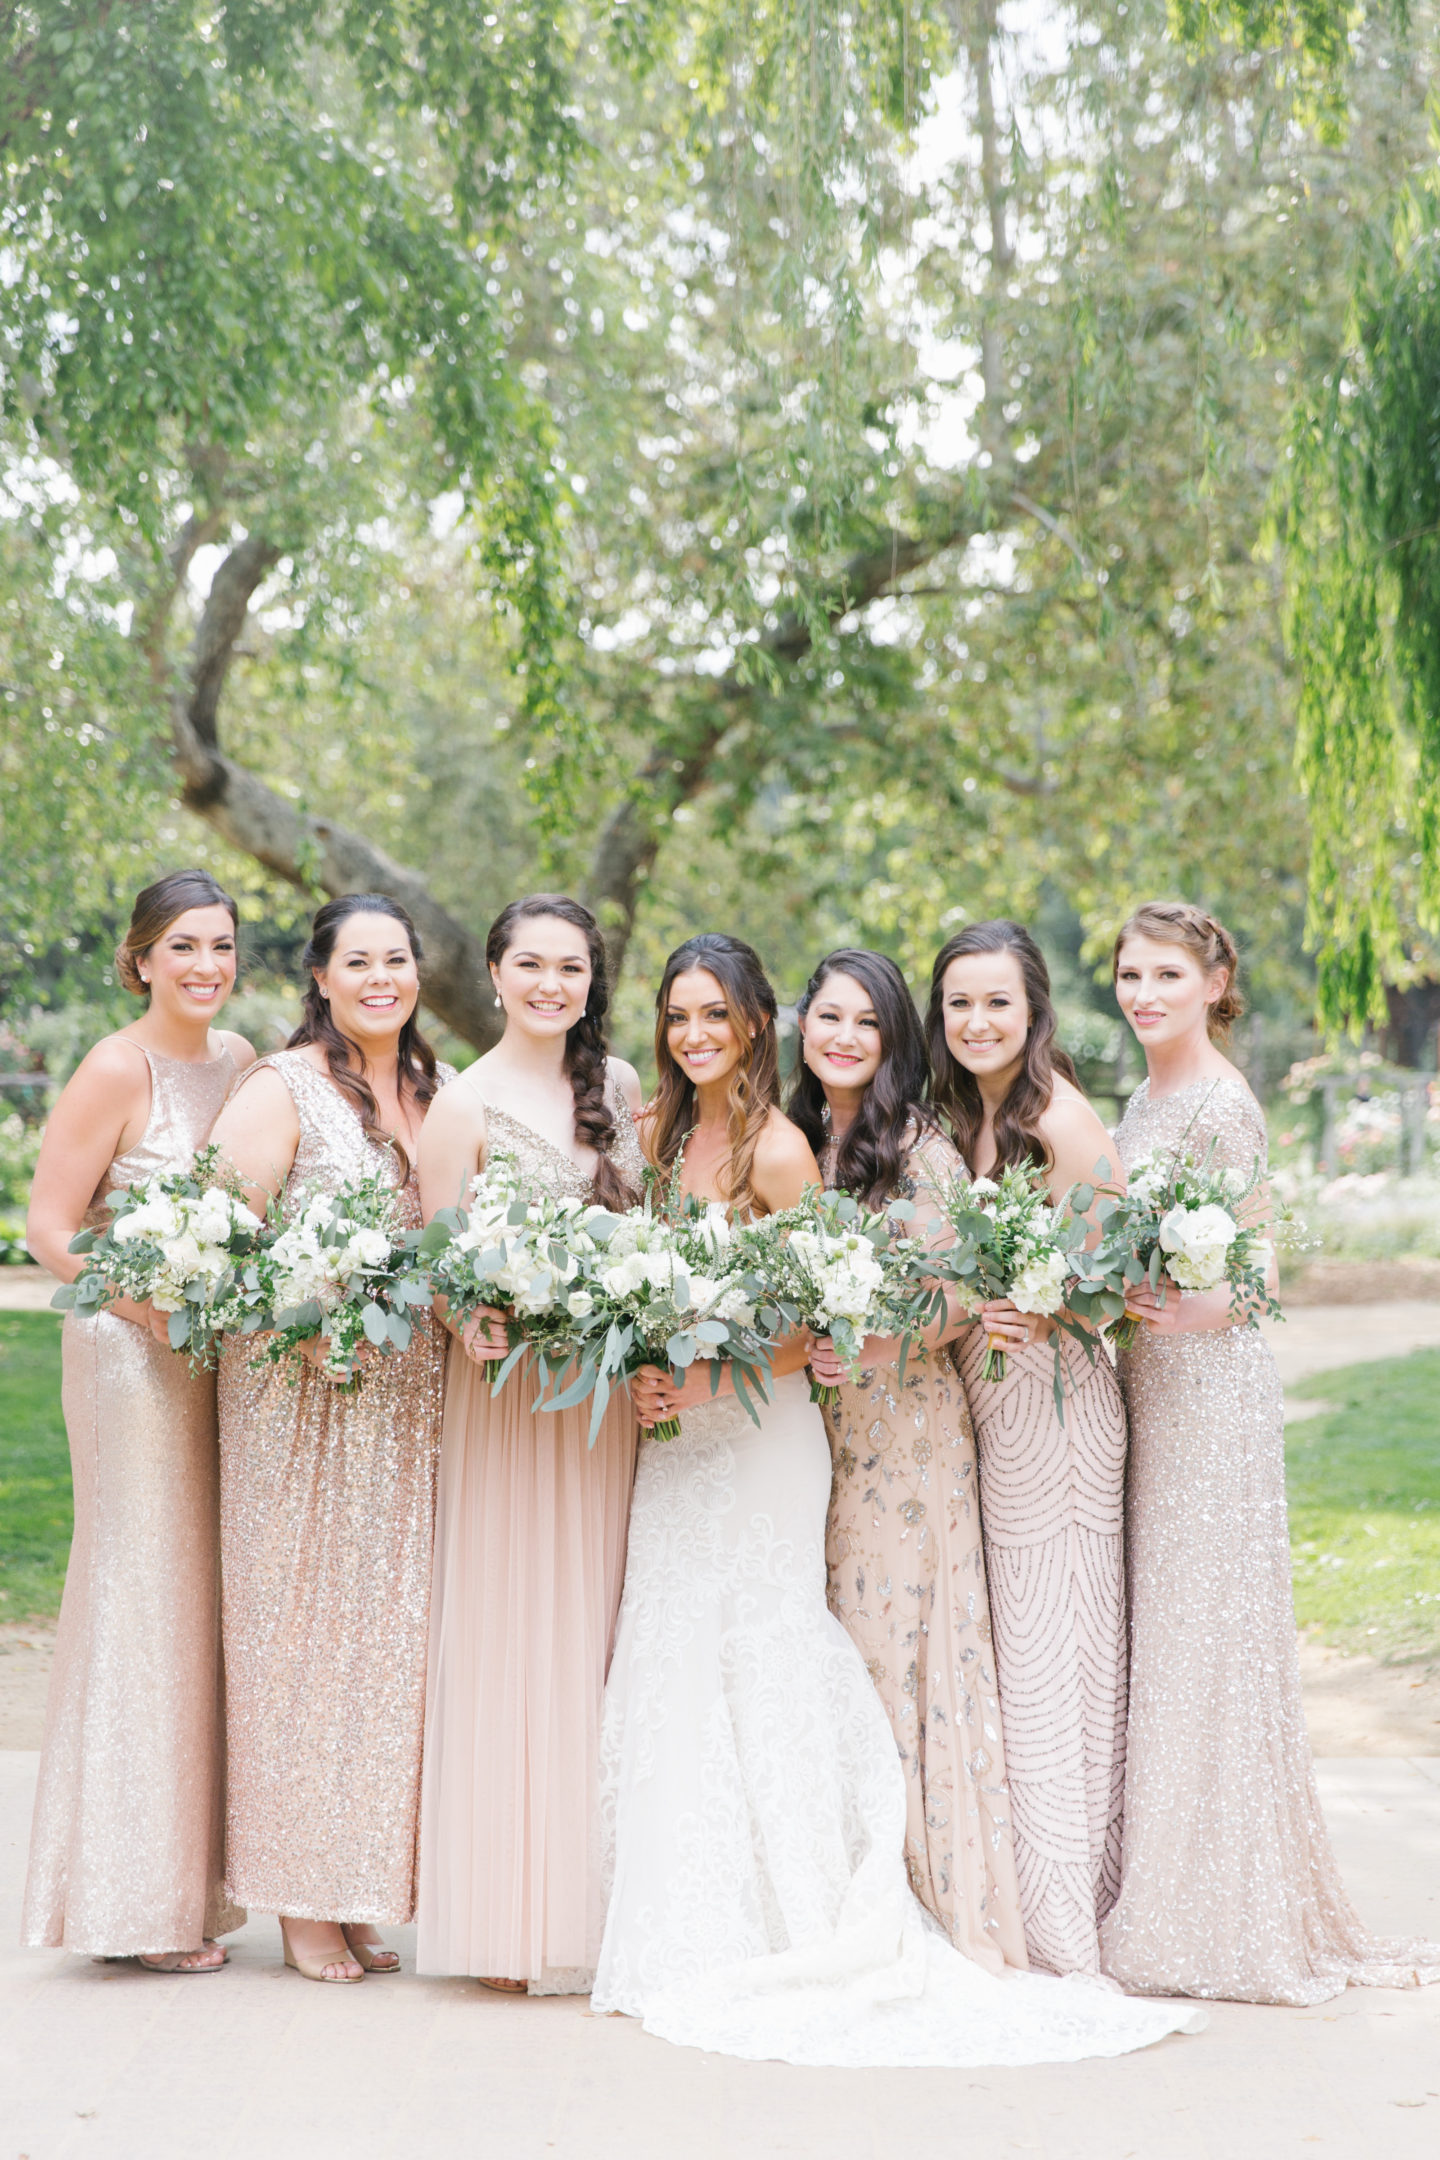 Mismatched Bridesmaid Dresses | Neutral Wedding Colors | Dimitra Weiss